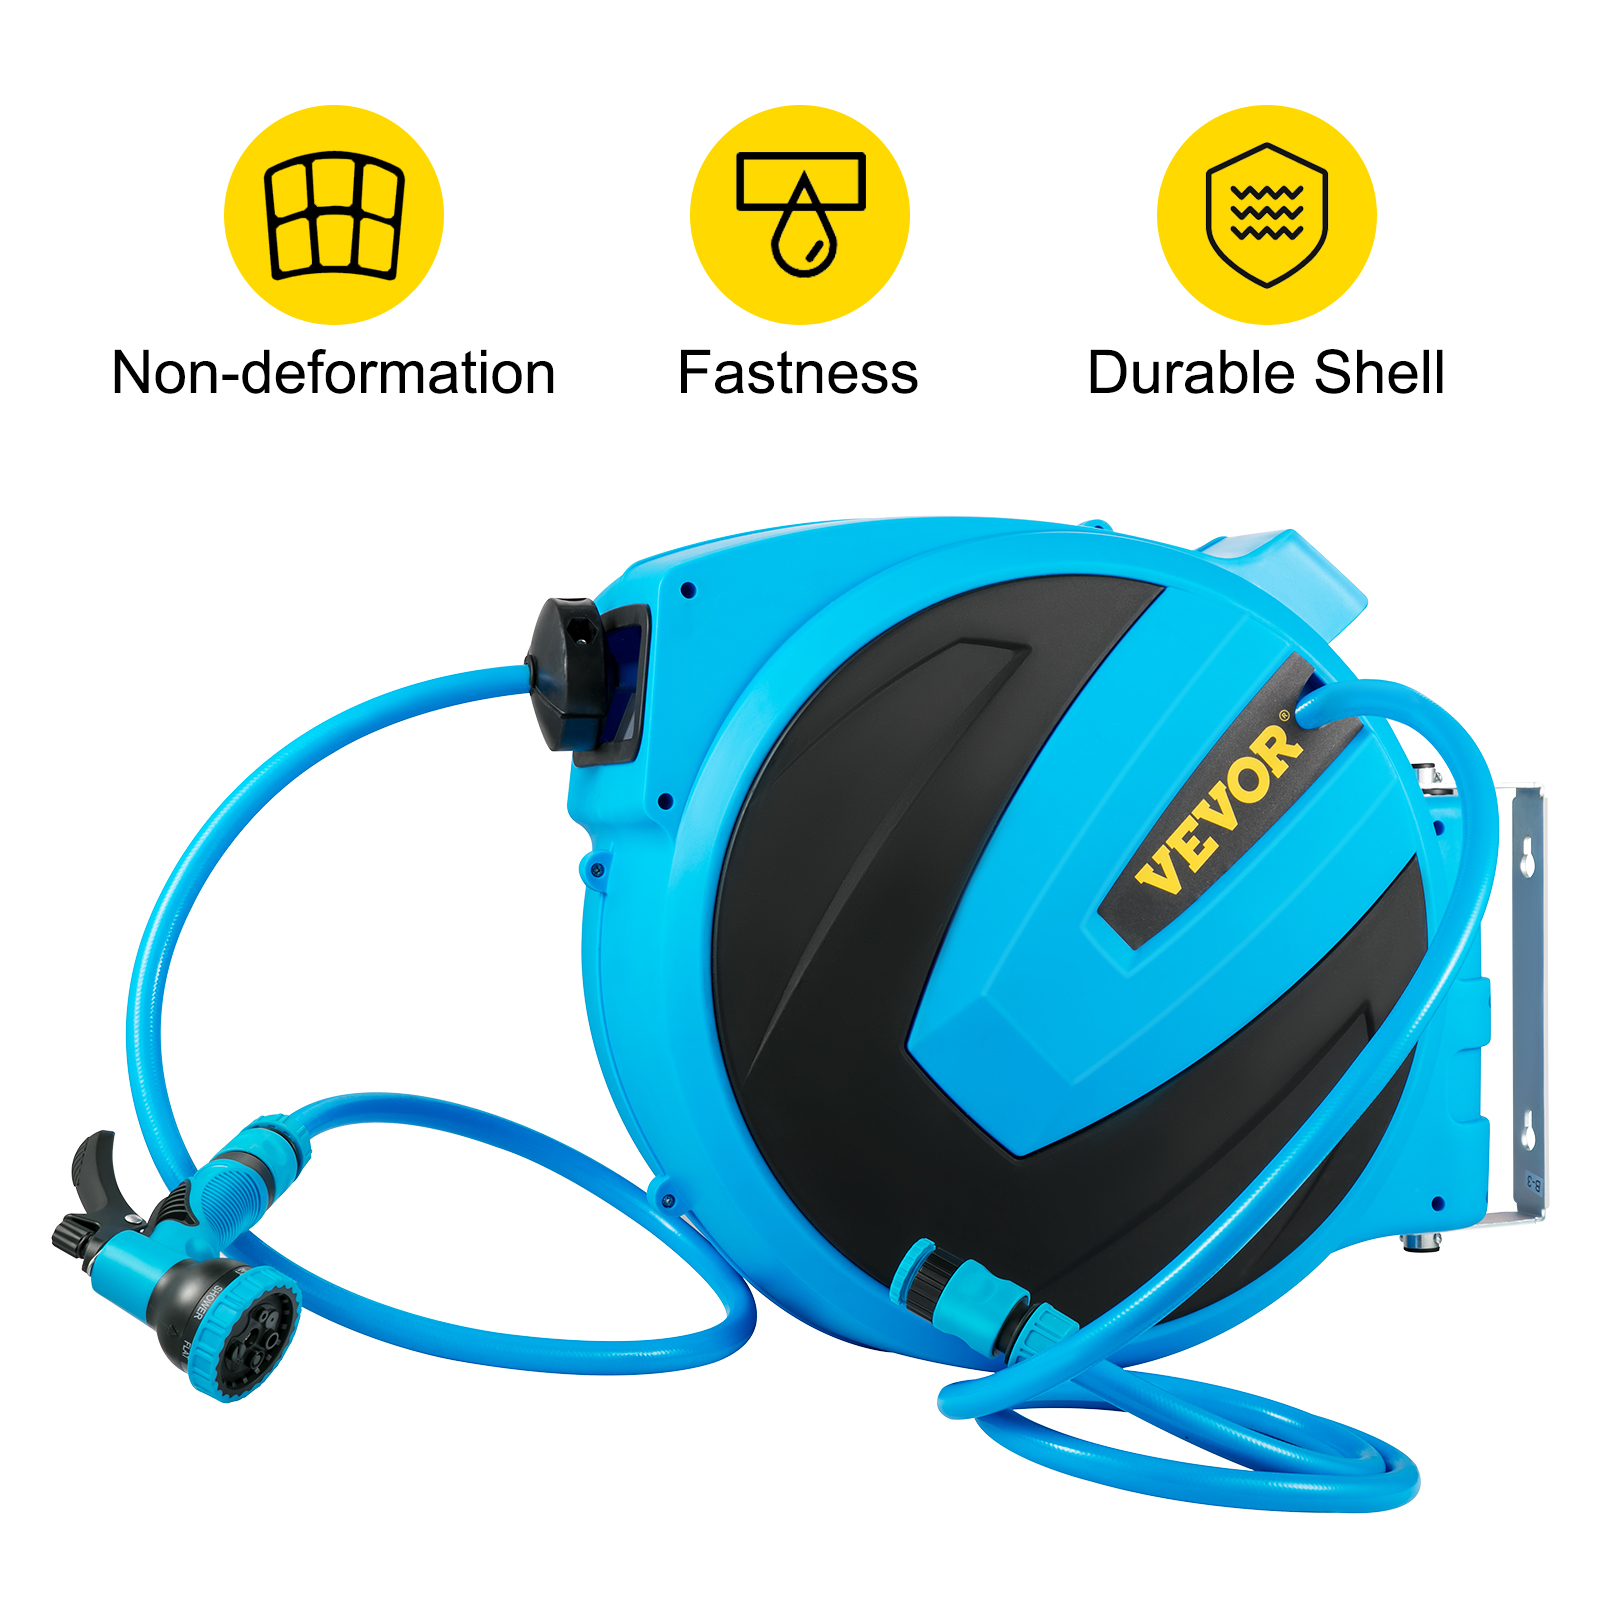 VEVOR Retractable Hose Reel, 5/8 inch x 90 ft, Any Length Lock & Automatic  Rewind Water Hose, Wall Mounted Garden Hose Reel w/ 180° Swivel Bracket and  7 Pattern Hose Nozzle, Blue